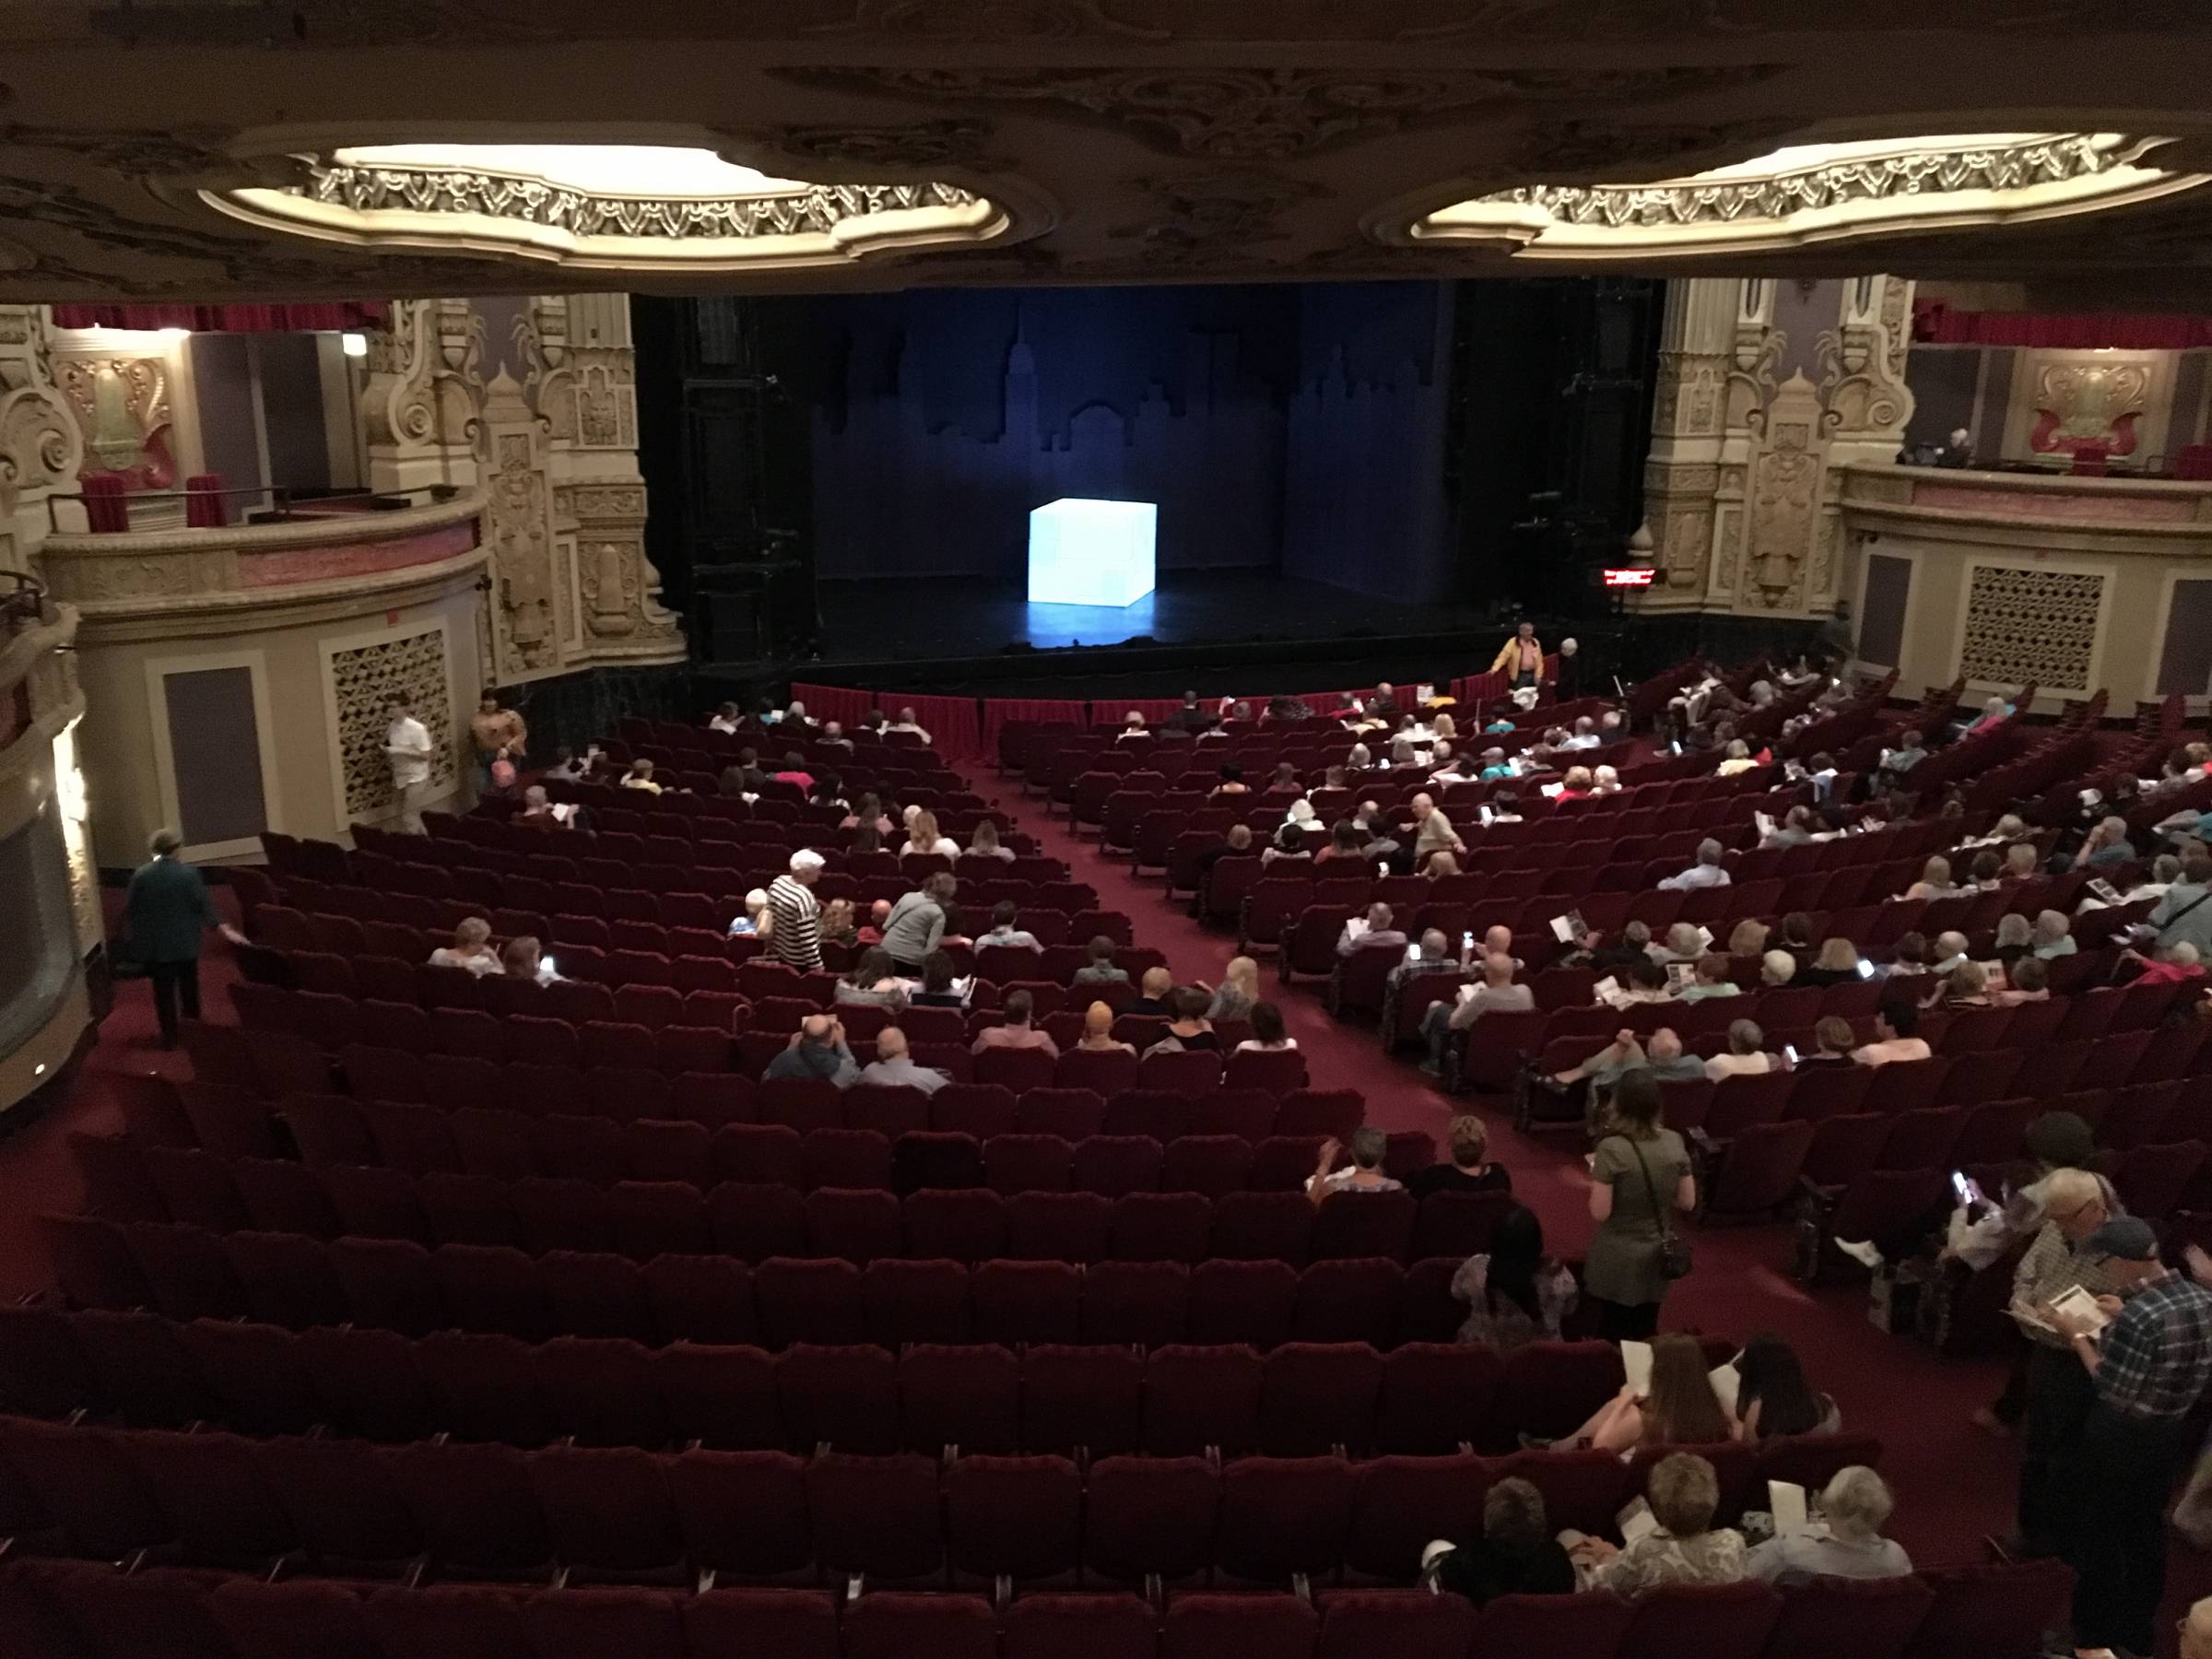 Left view of dress circle seats at Nederlander Theatre